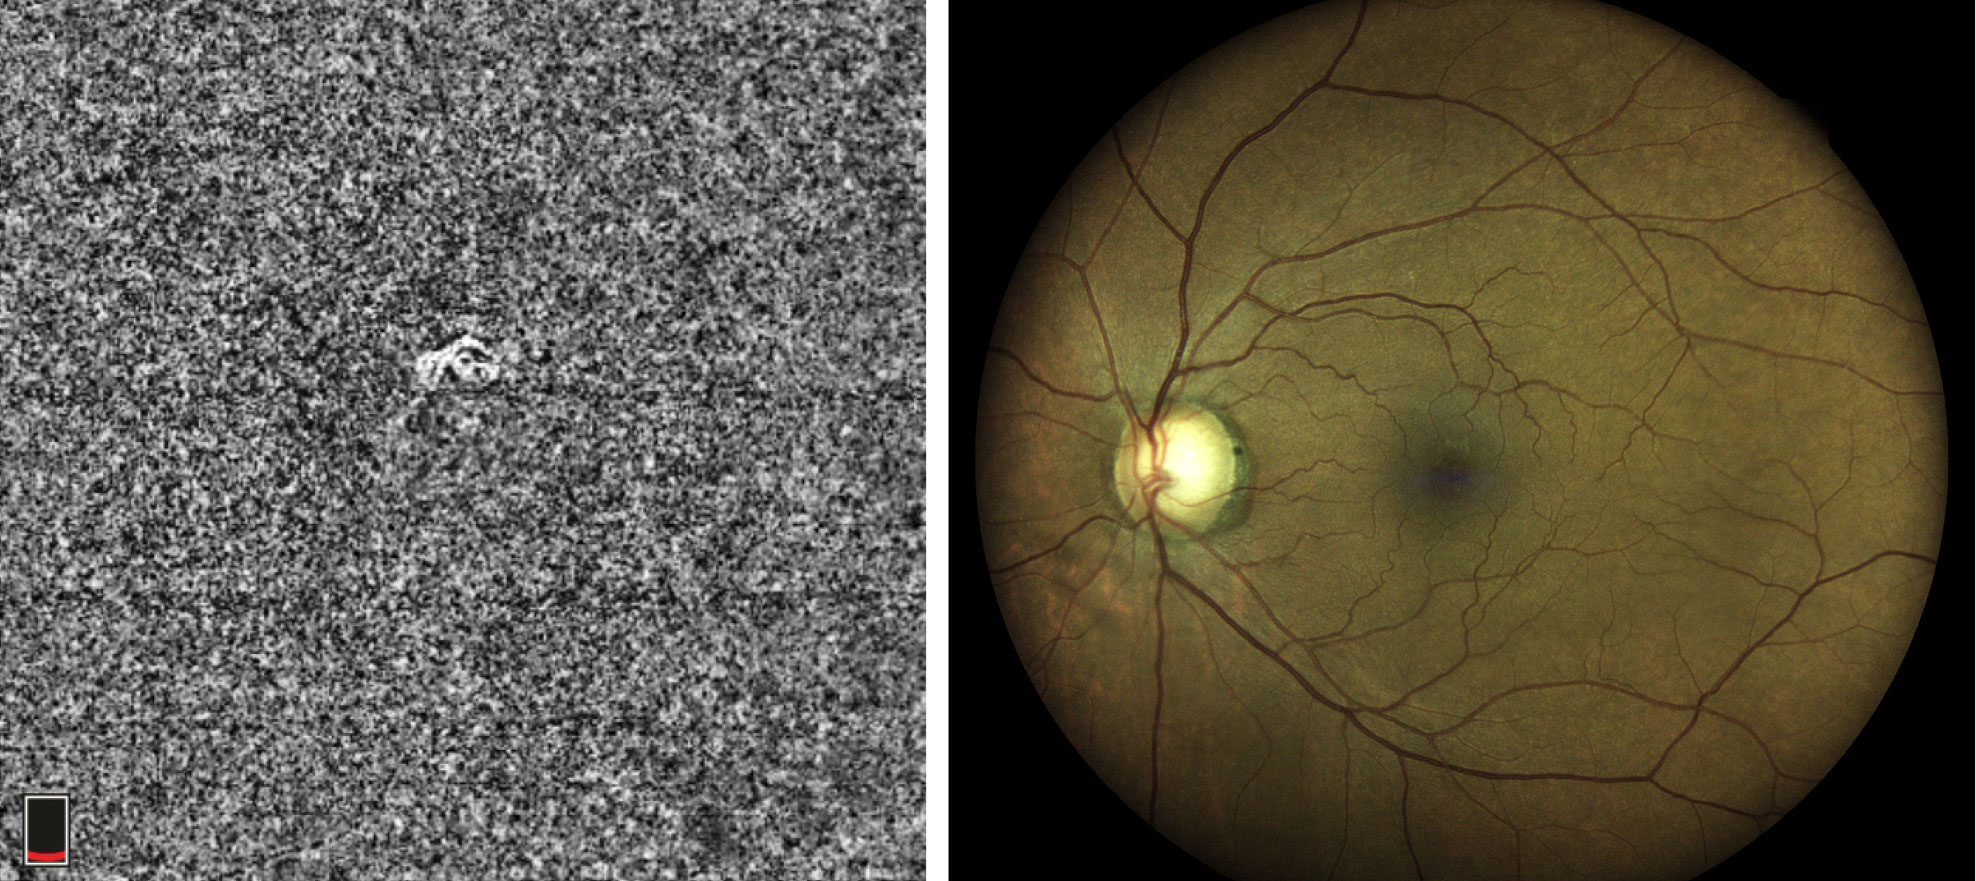 This 63-year-old African American male is a glaucoma suspect with no visible abnormality noted in the macula on fundus examination. However, the choriocapillaris slab and the B-scan with segmentation lines set at the choriocapillaris depict a non-exudative occult choroidal neovascular membrane. In this case, OCT-A identified a naïve macular lesion that was not visible clinically, allowing for timely referral and comanagement.